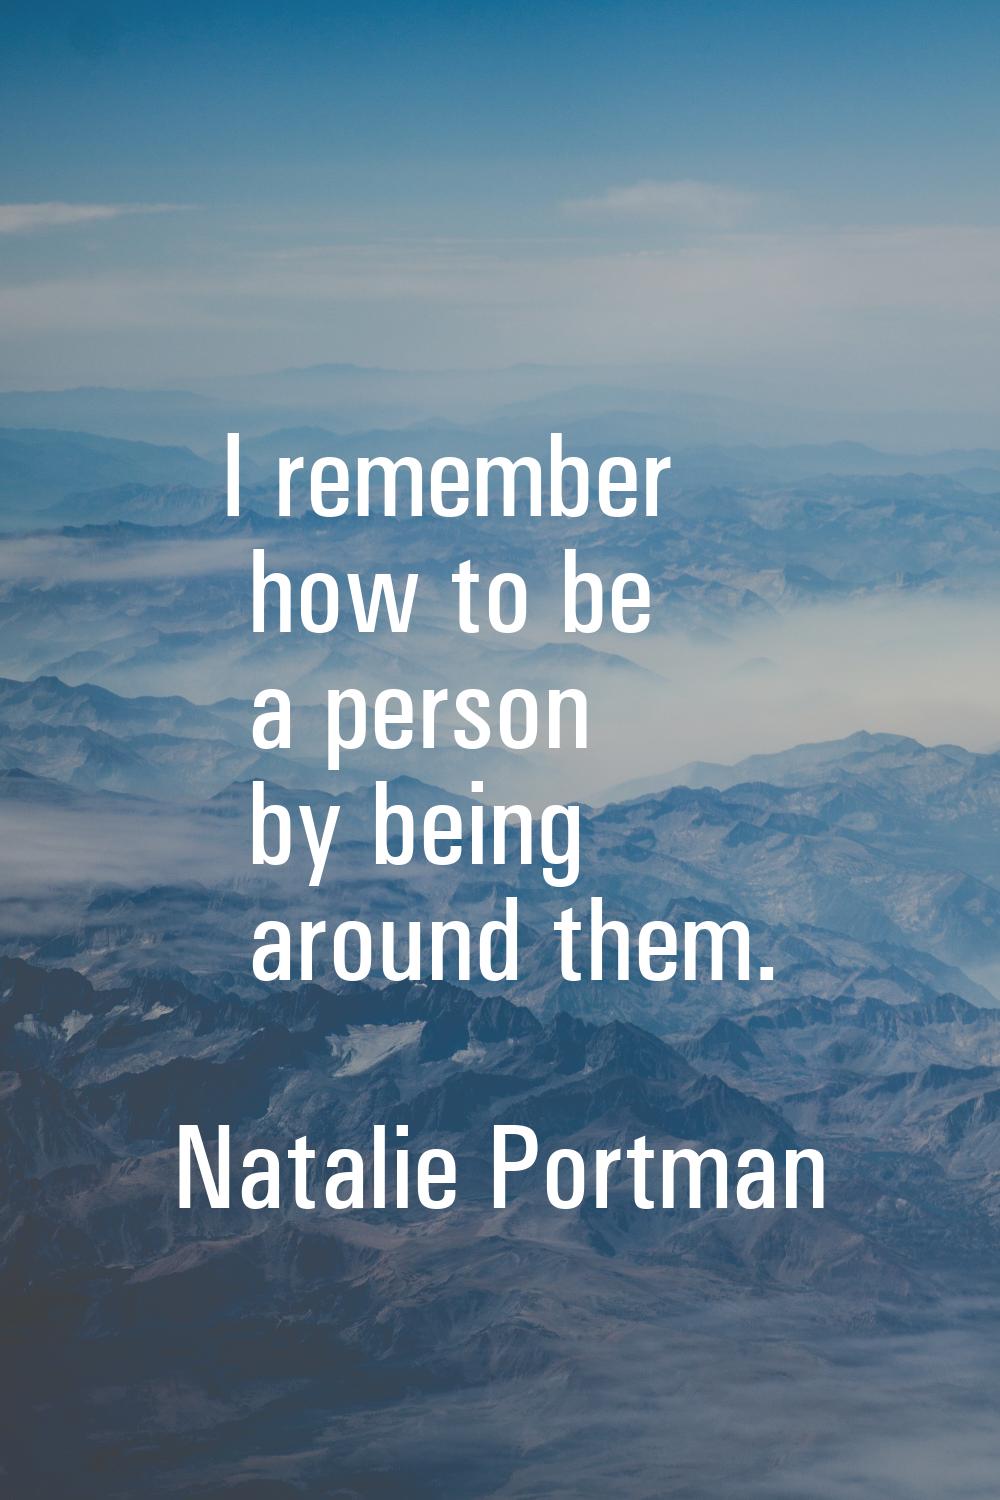 I remember how to be a person by being around them.